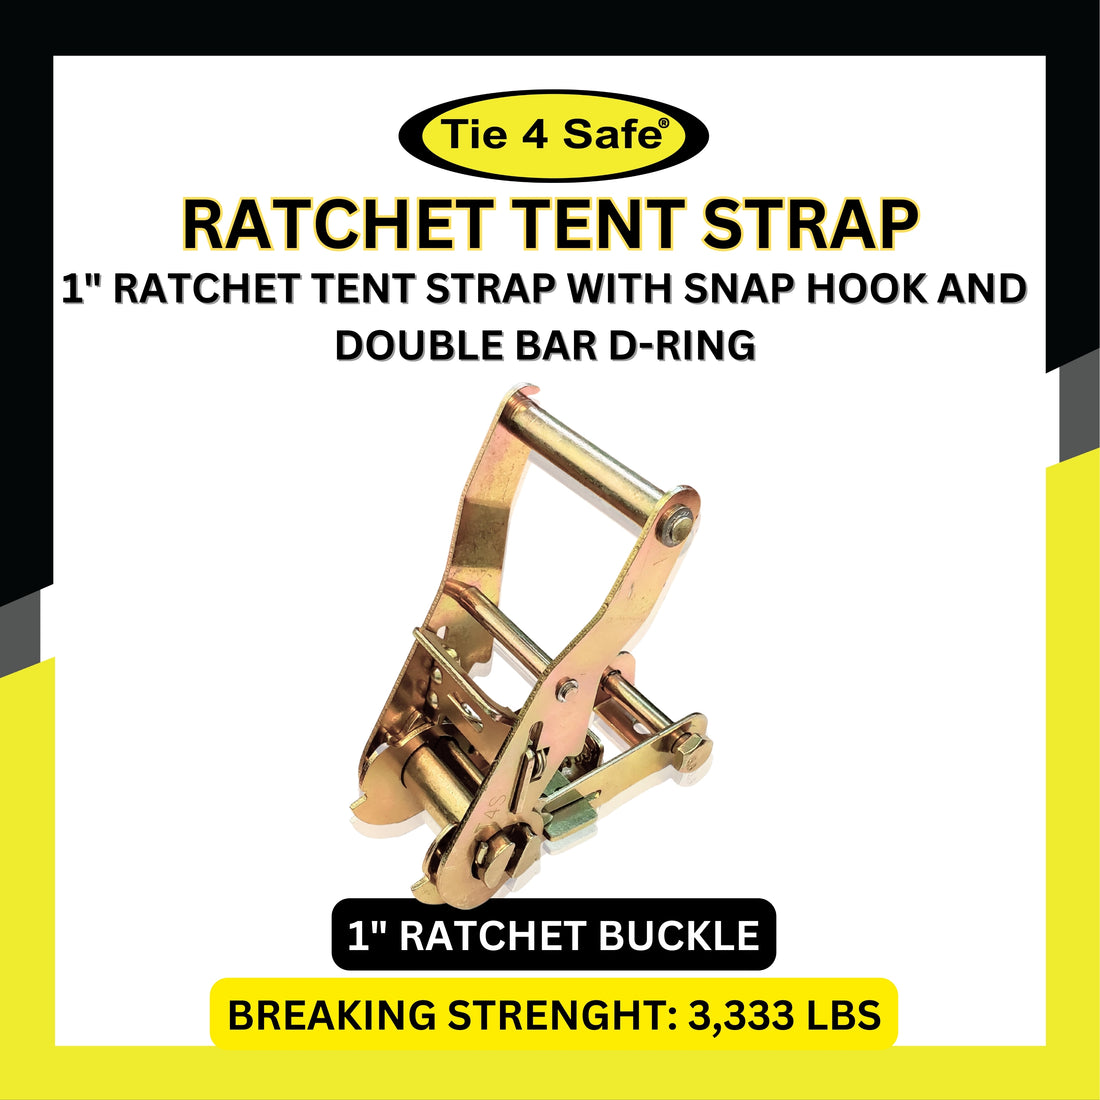 1" Ratchet Buckle Tent Strap With Snap Hook And Double Bar D-Rings